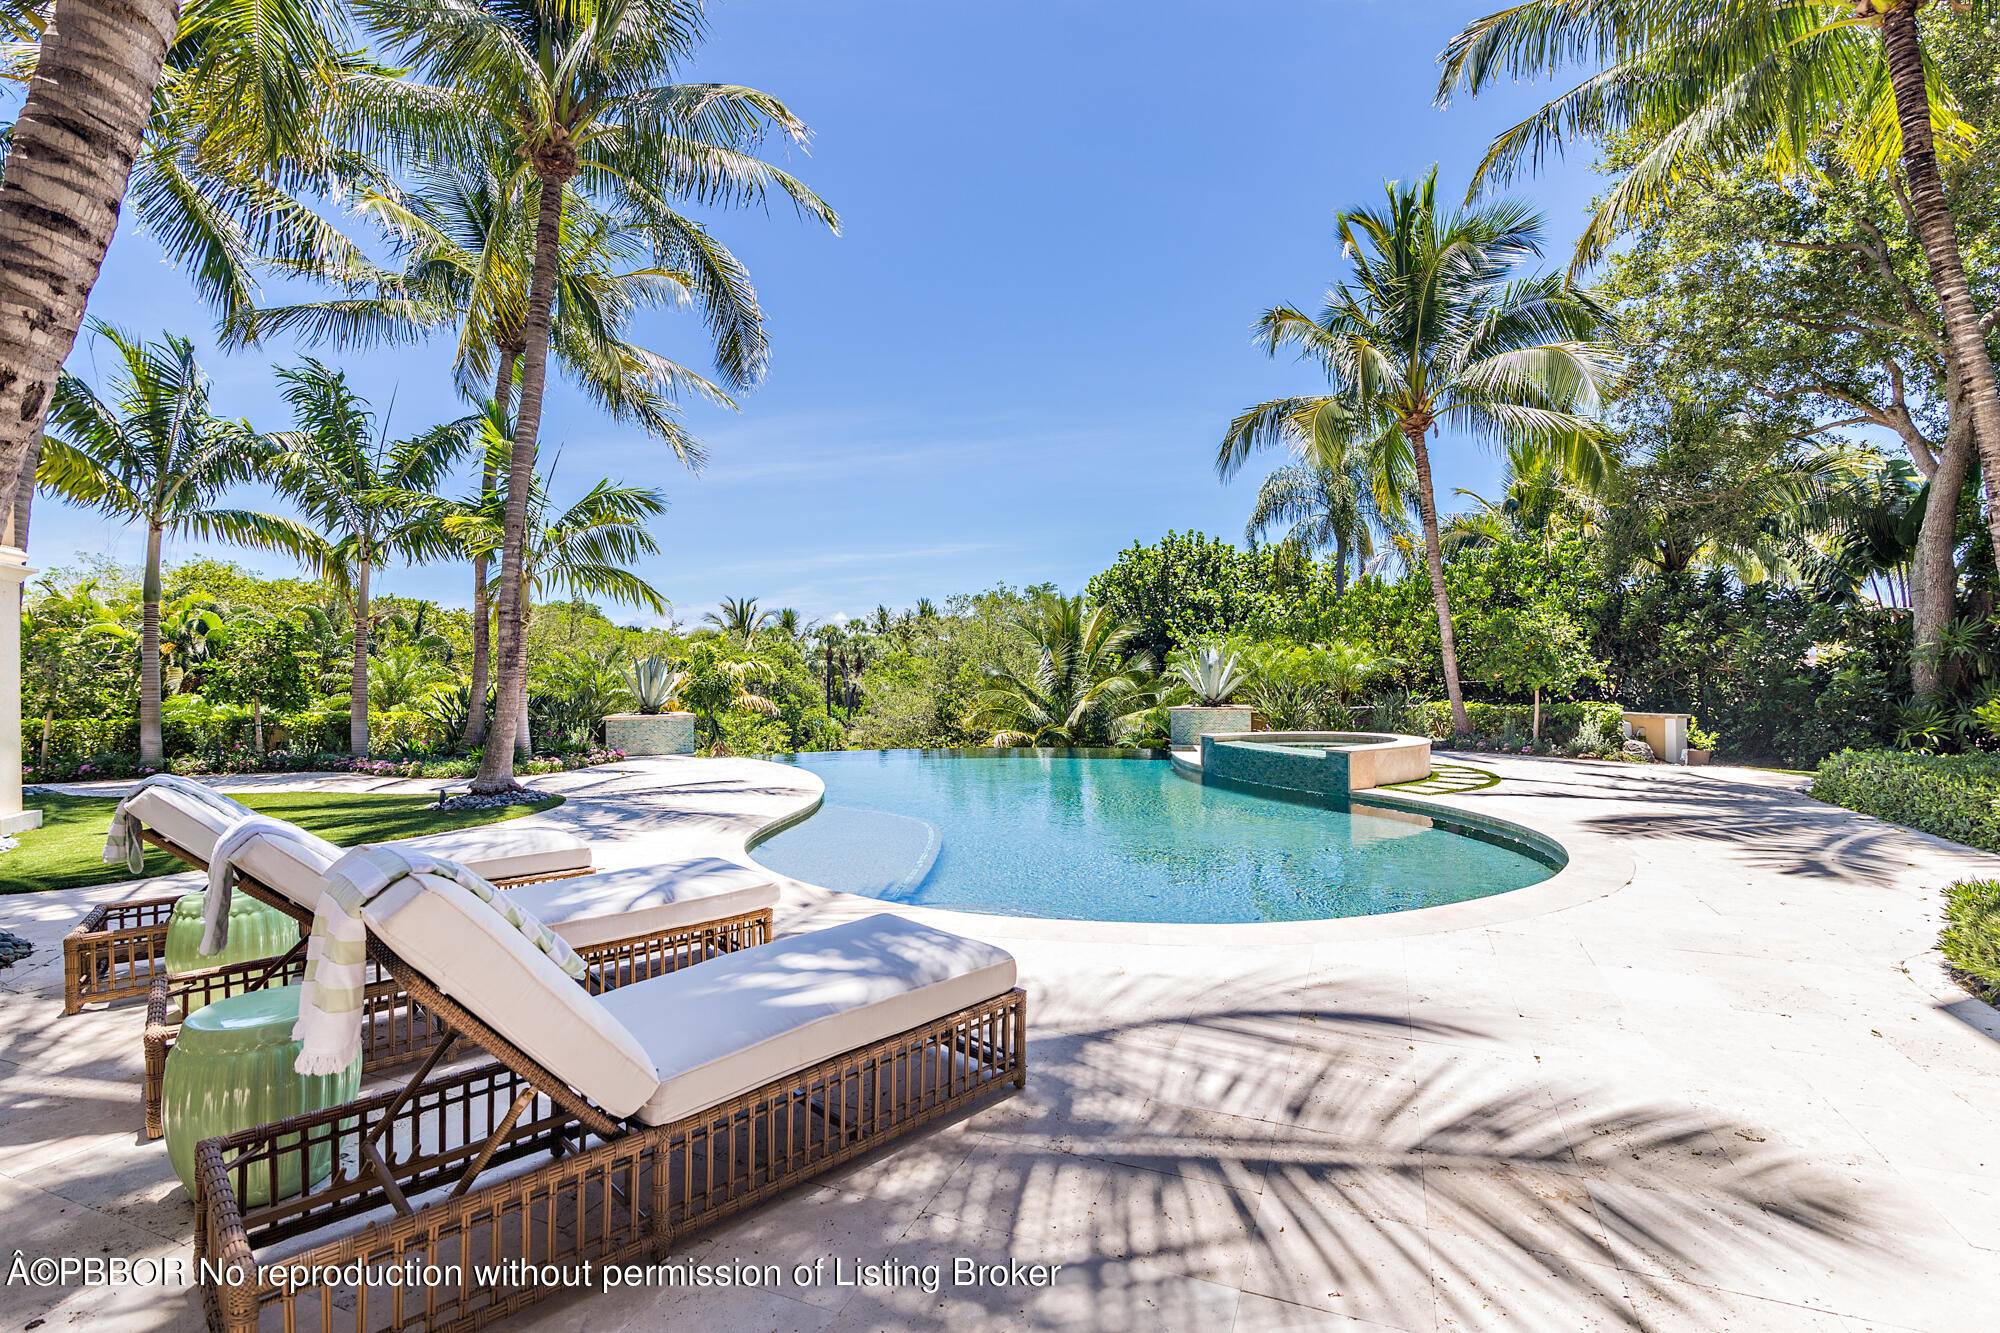 This elegant Mediterranean estate, situated on a high elevation, offers unparalleled views of the expansive tropical canopy of trees and the water below.